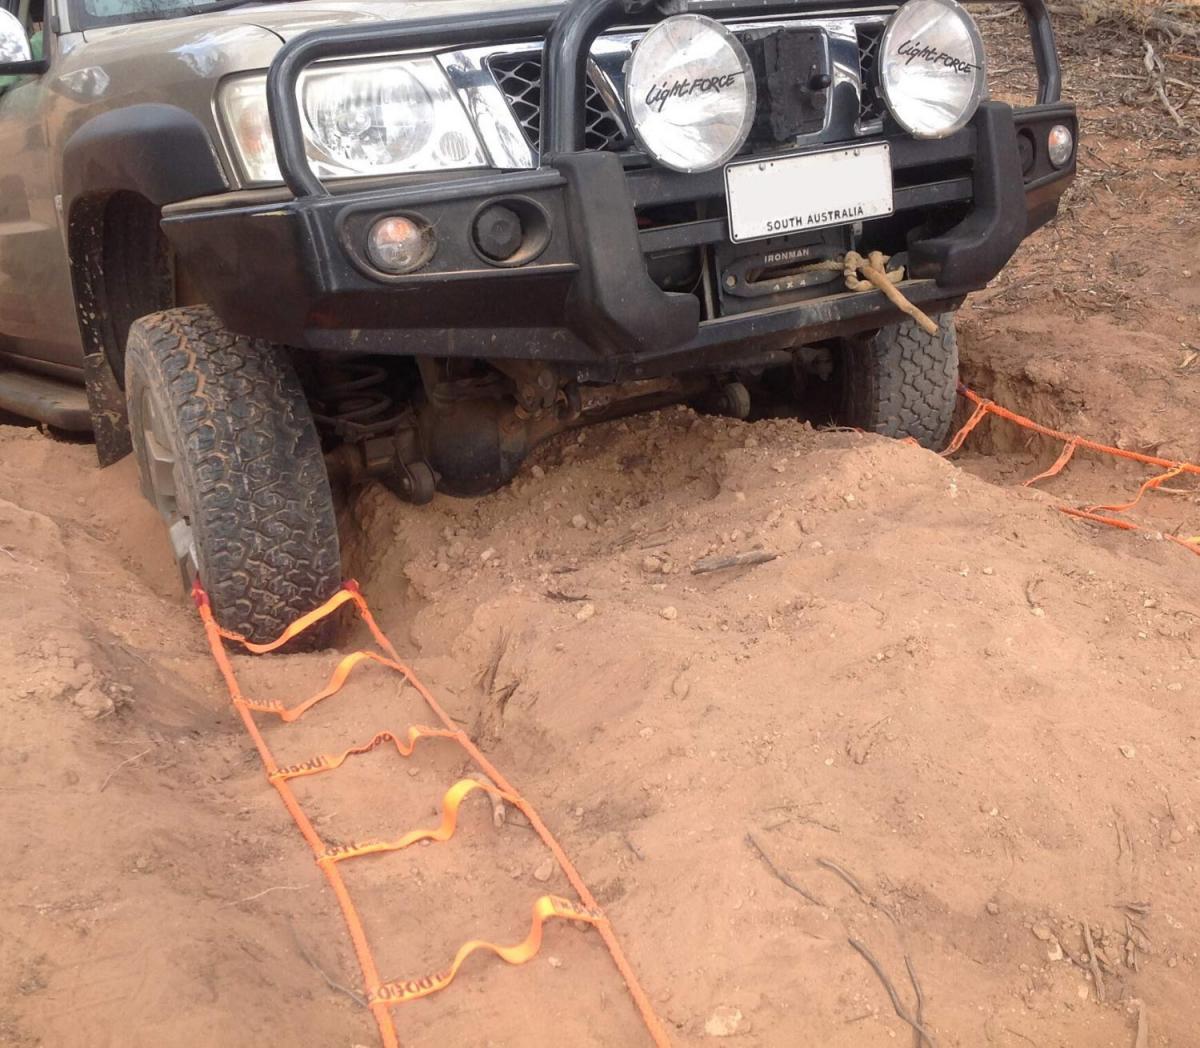 Bog Out Turns Your Wheel Into a Winch To Get You Unstuck in mud, sand, and snow